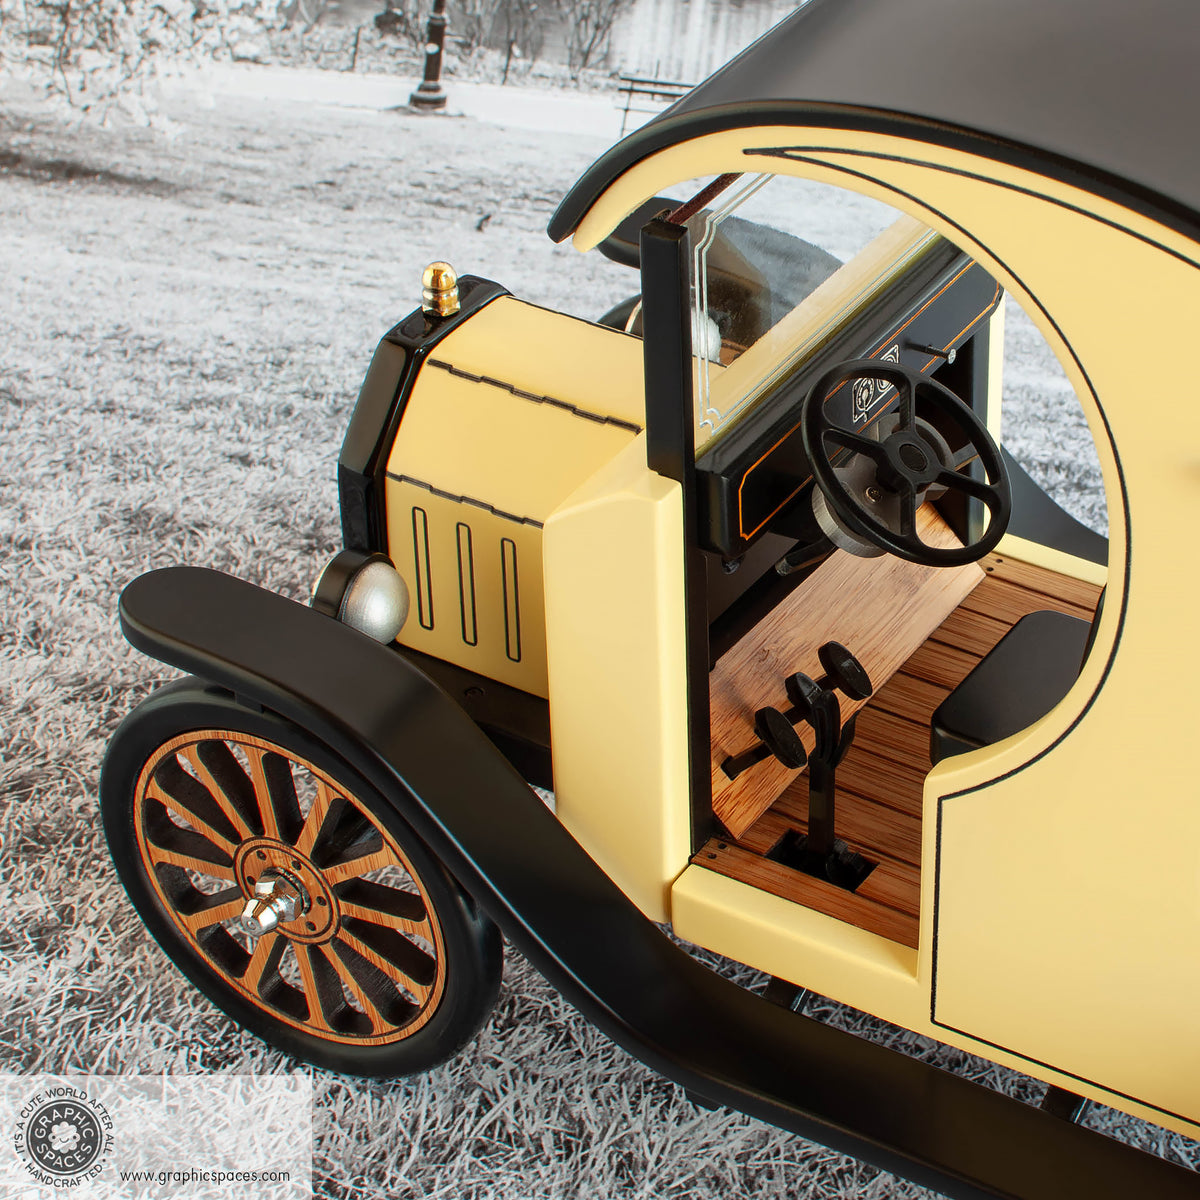 1:12 Scale Room Box Yellow Flower Shop Truck Model T C Cab. Interior driver side view detailing dash, floor, steering wheel.